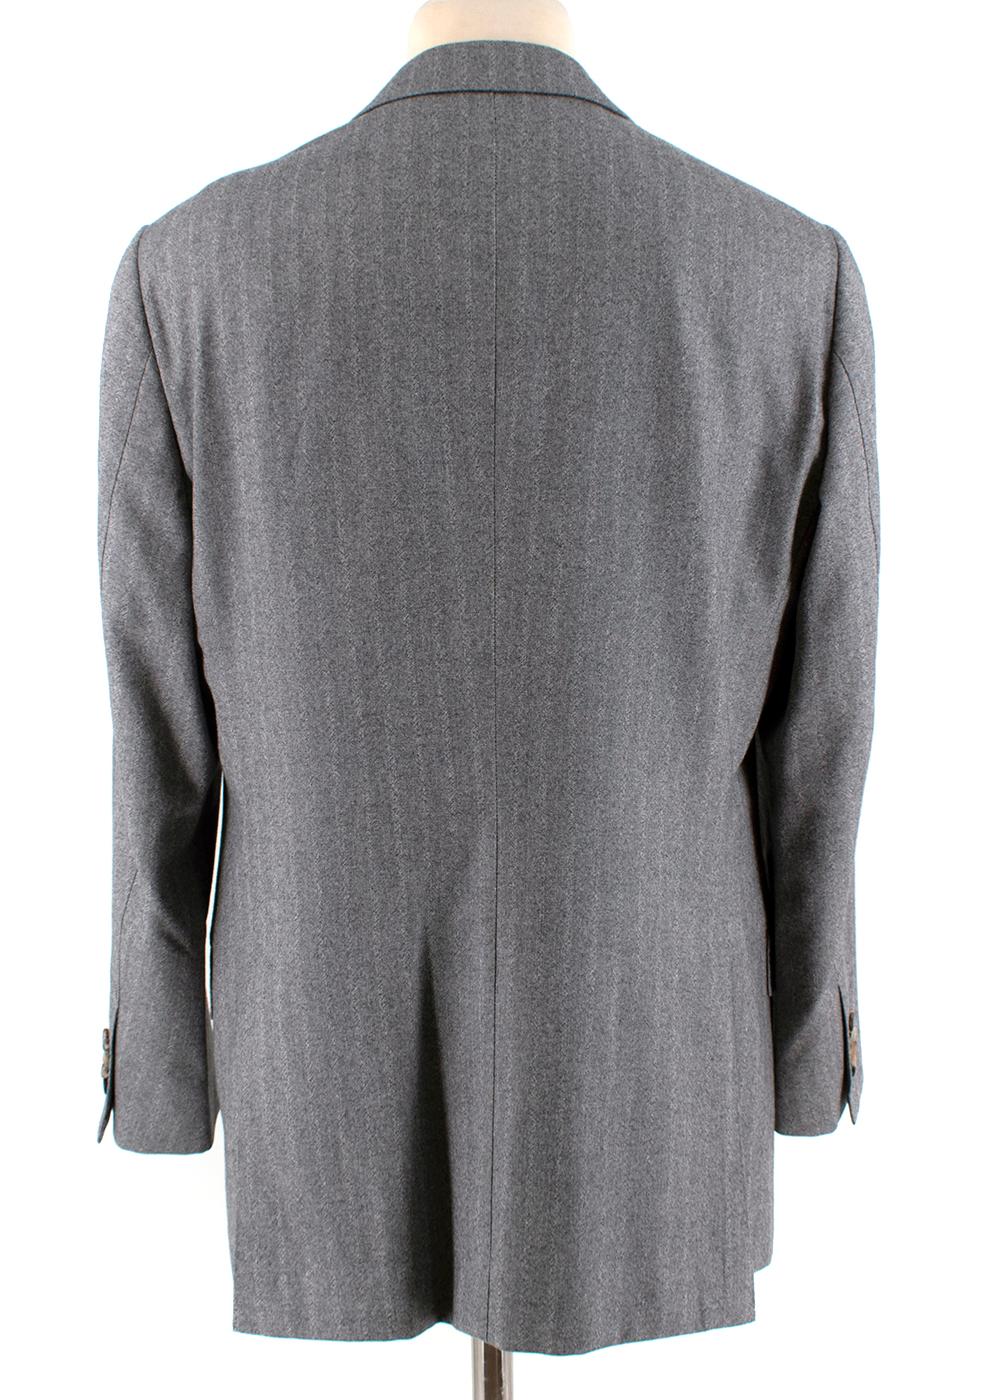 Gray Ermenegildo Zegna Couture Grey Wool Single Breasted Suit - Size Estimated L For Sale